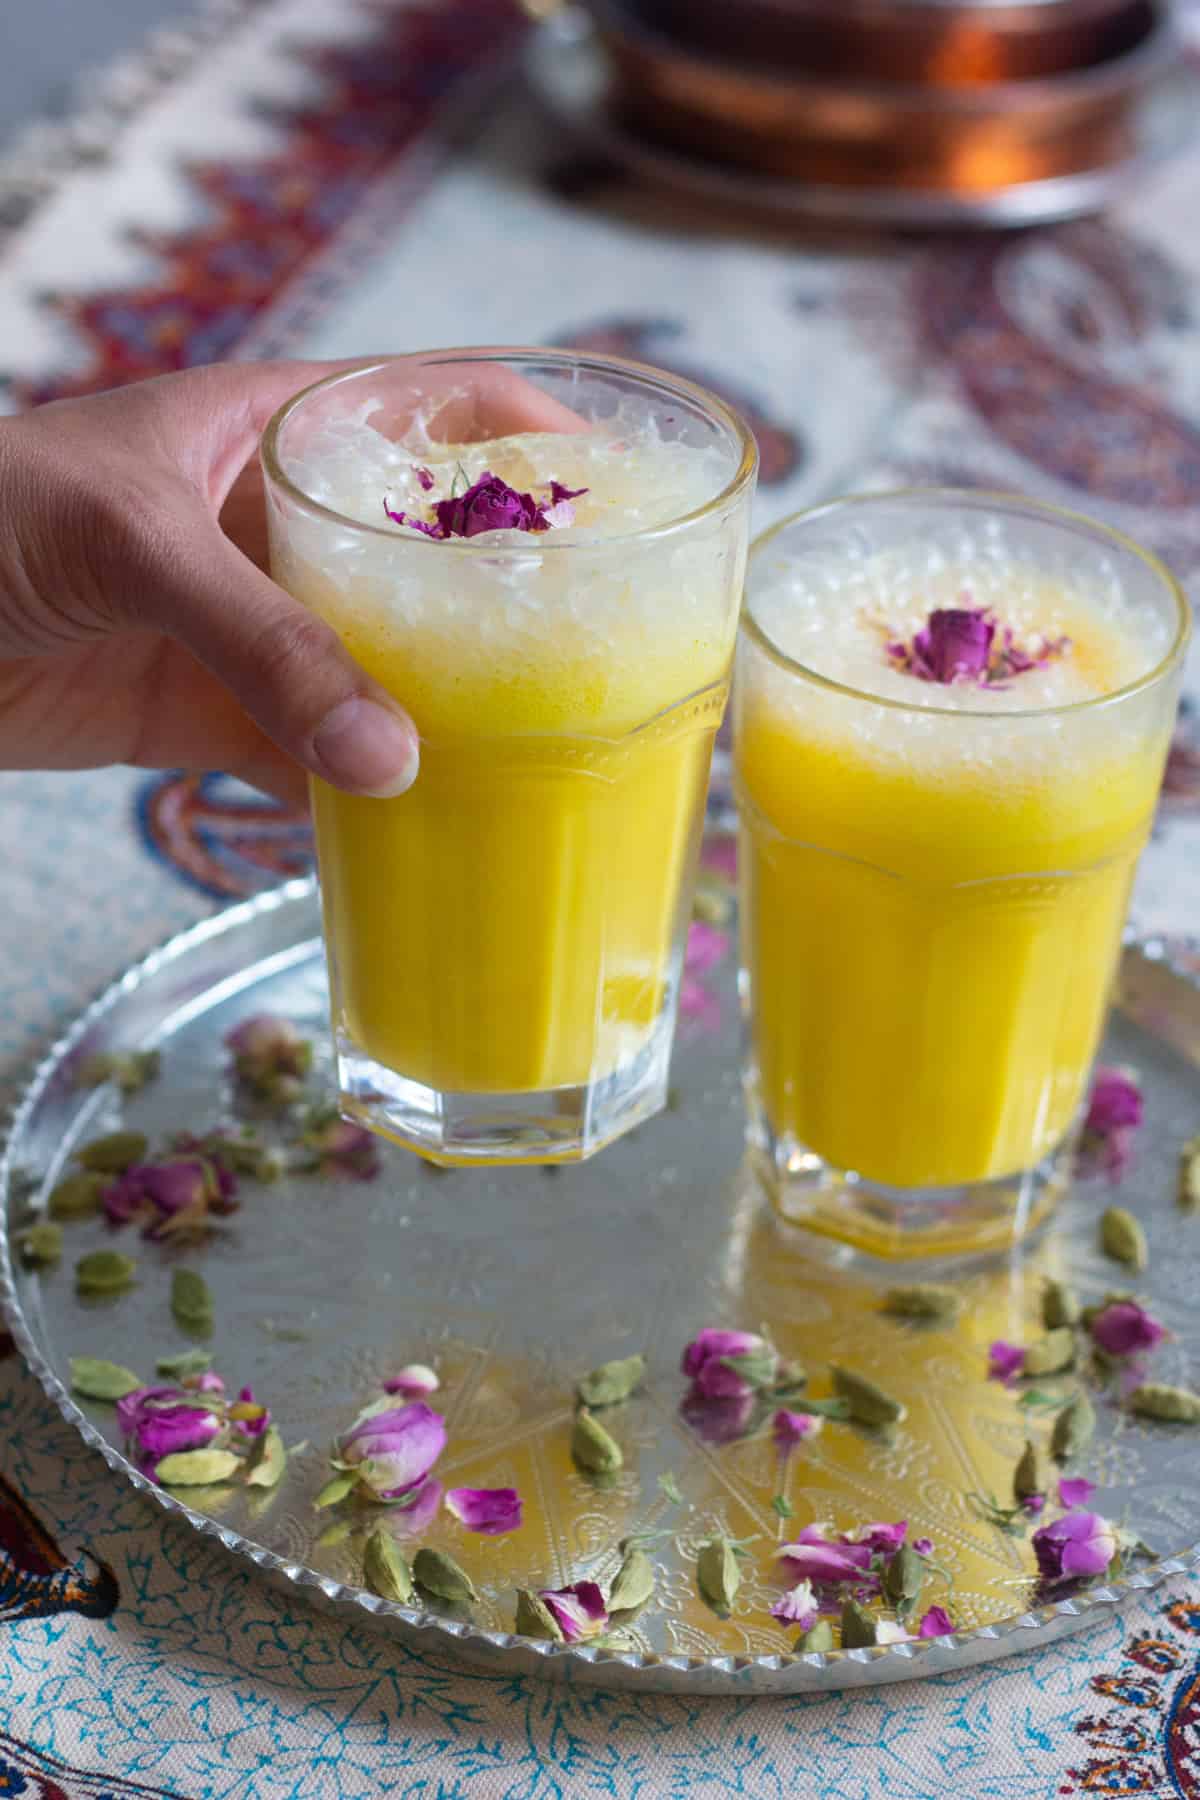 Take a delicious trip to Iran with this Persian Saffron Milkshake that tastes like traditional Iranian ice cream without the hassle!
